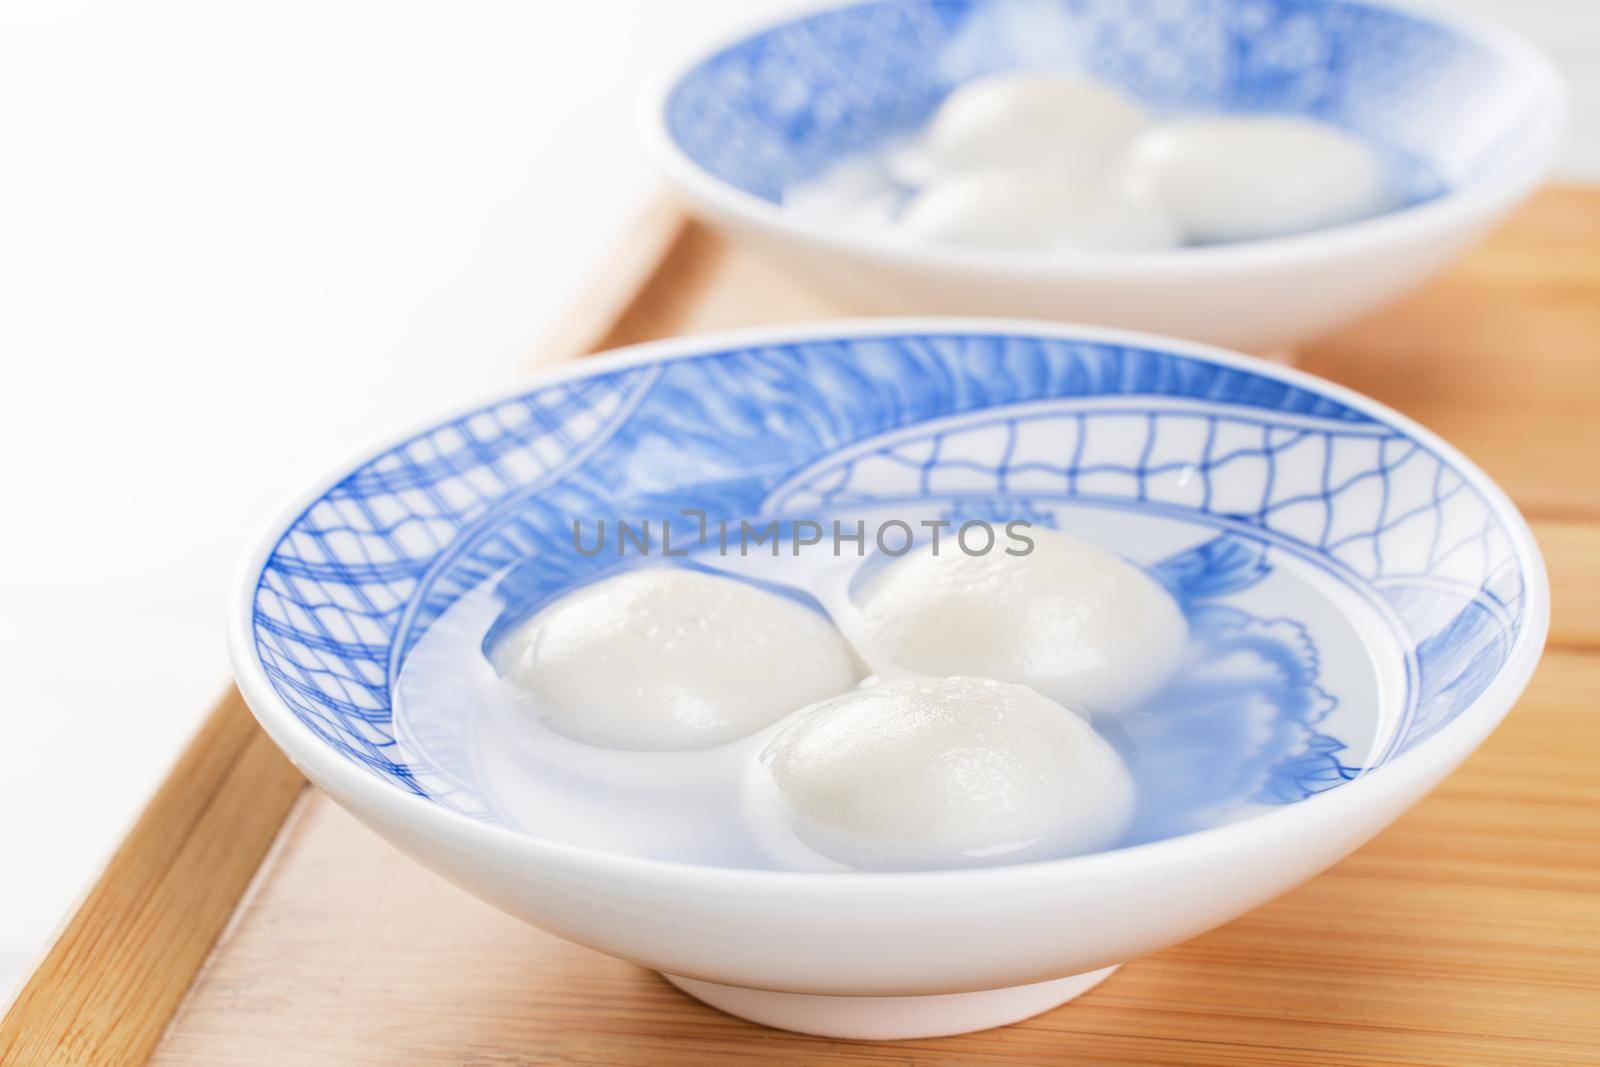 Delicious tang yuan, yuanxiao in a small bowl. Asian traditional festive food rice dumplings ball with stuffed fillings for Chinese Lantern Festival, close up.